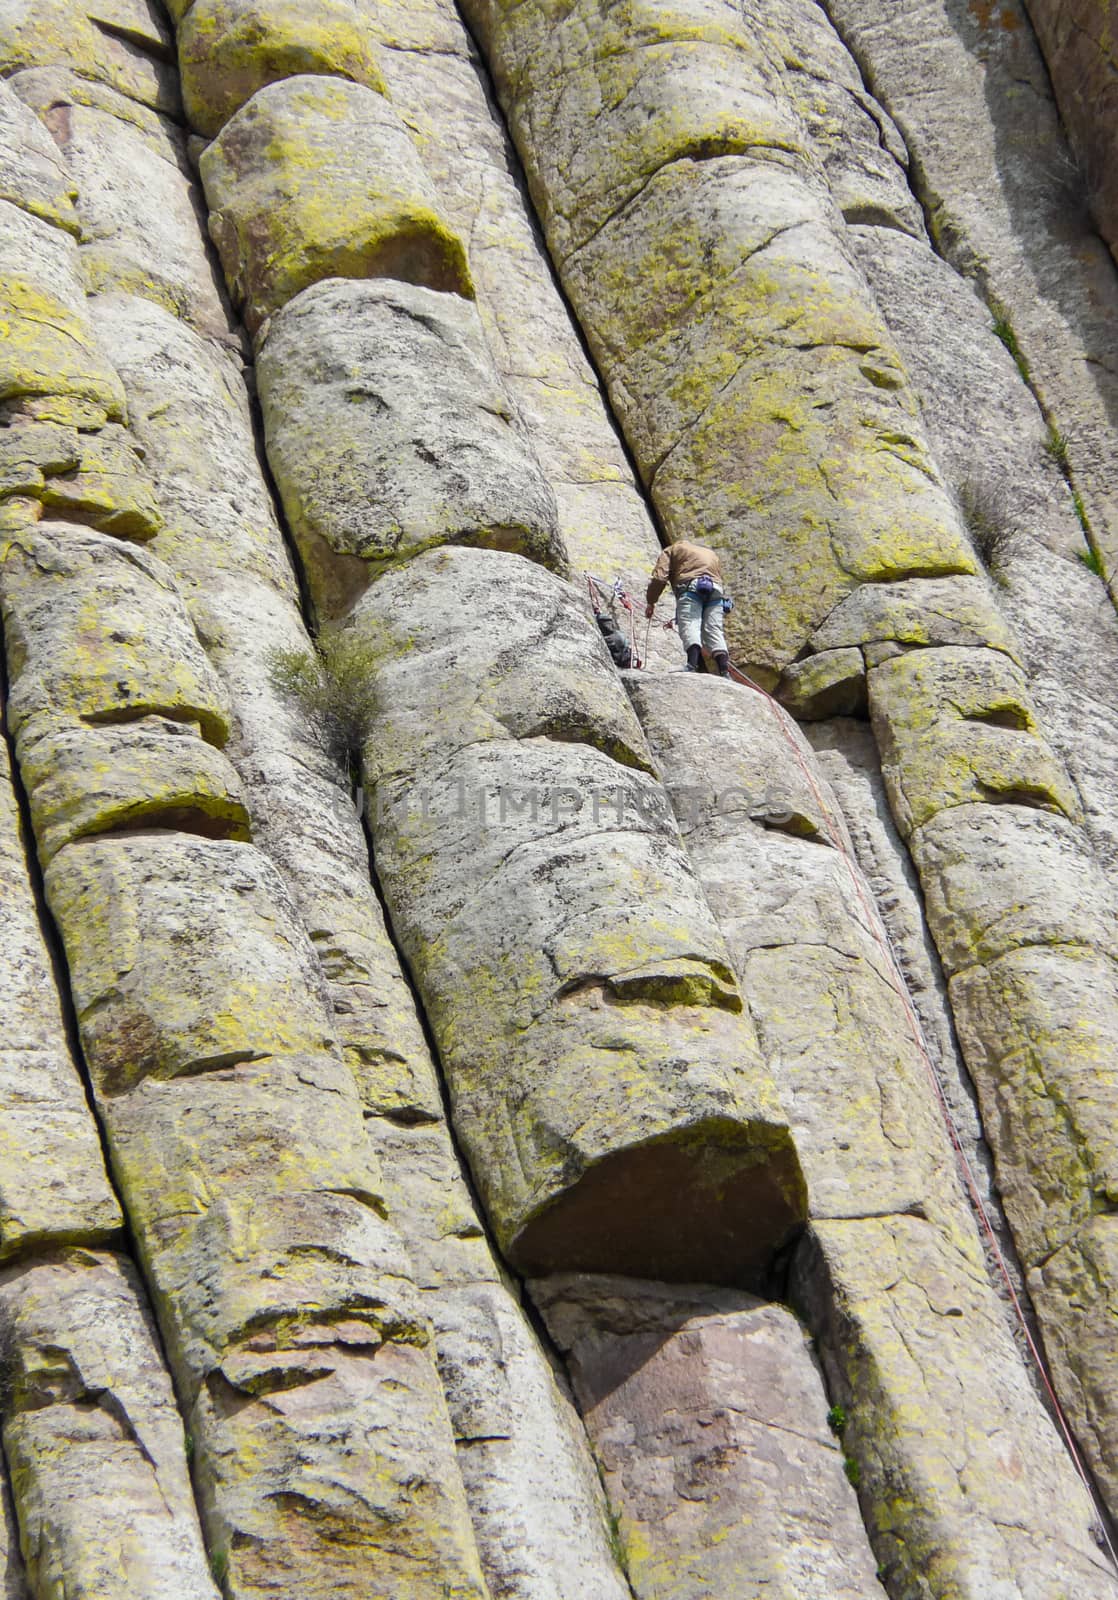 Mountain climber on Devils Tower in Wyoming by wit_gorski